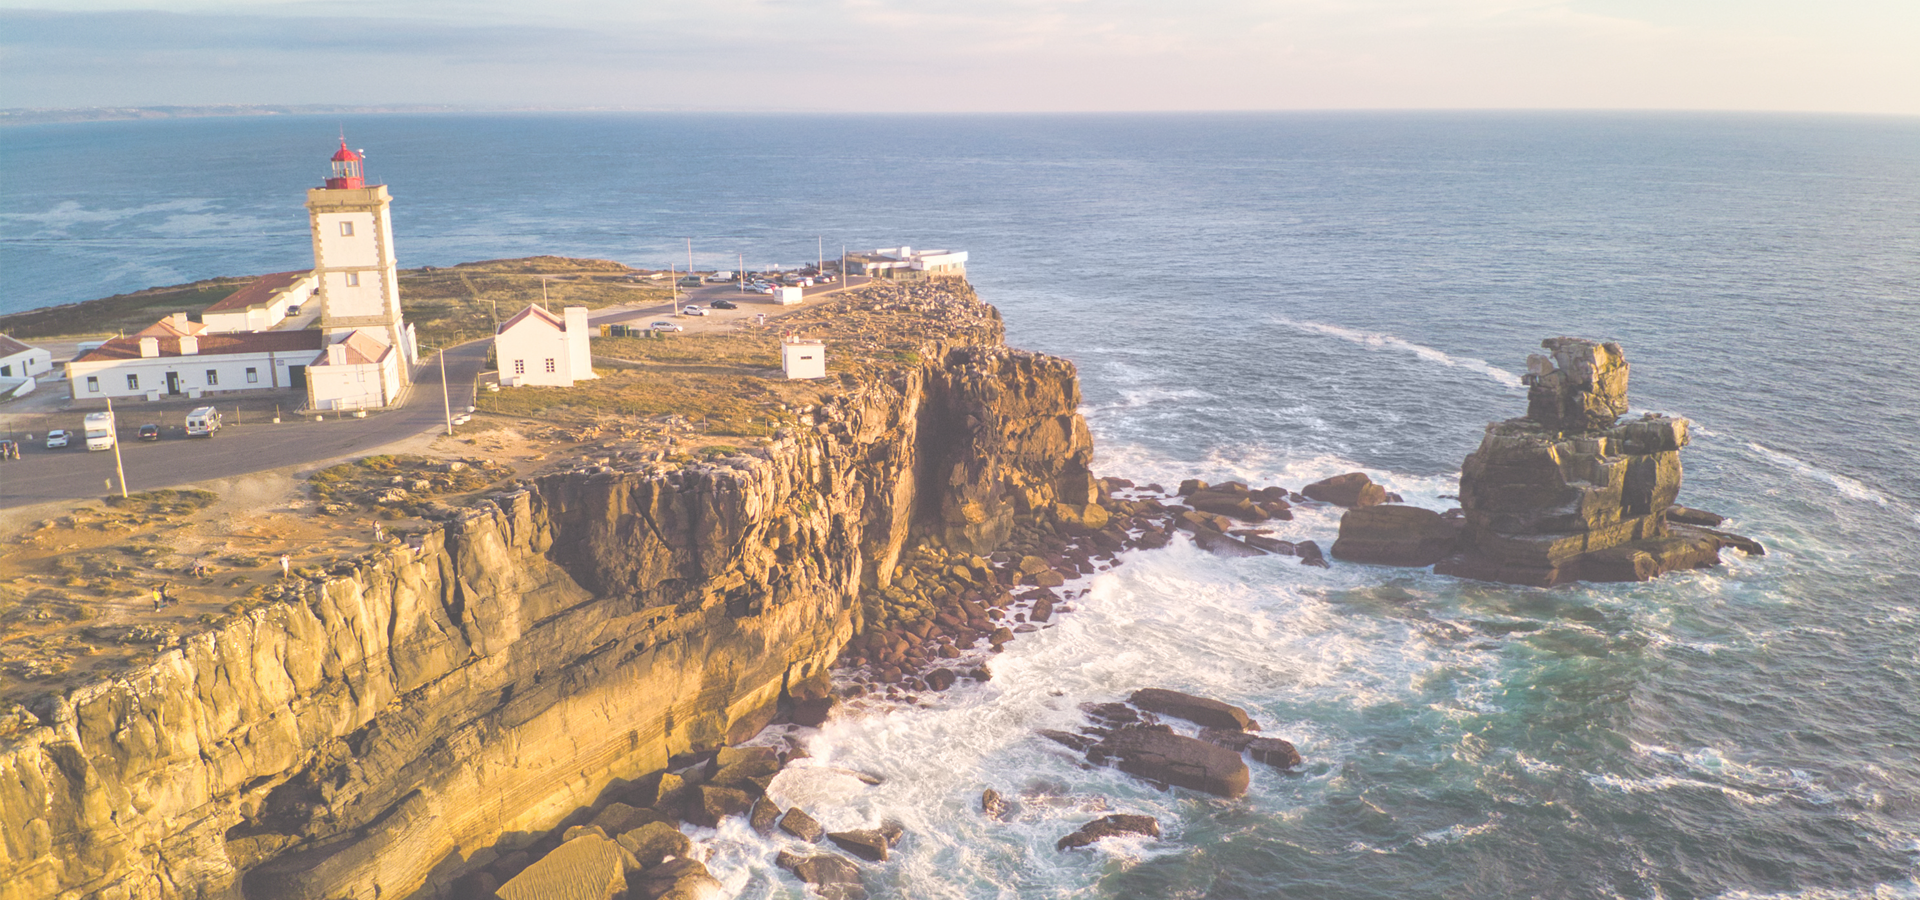 View Of Lighthouse And Sea In Peniche Portugal At Sunset